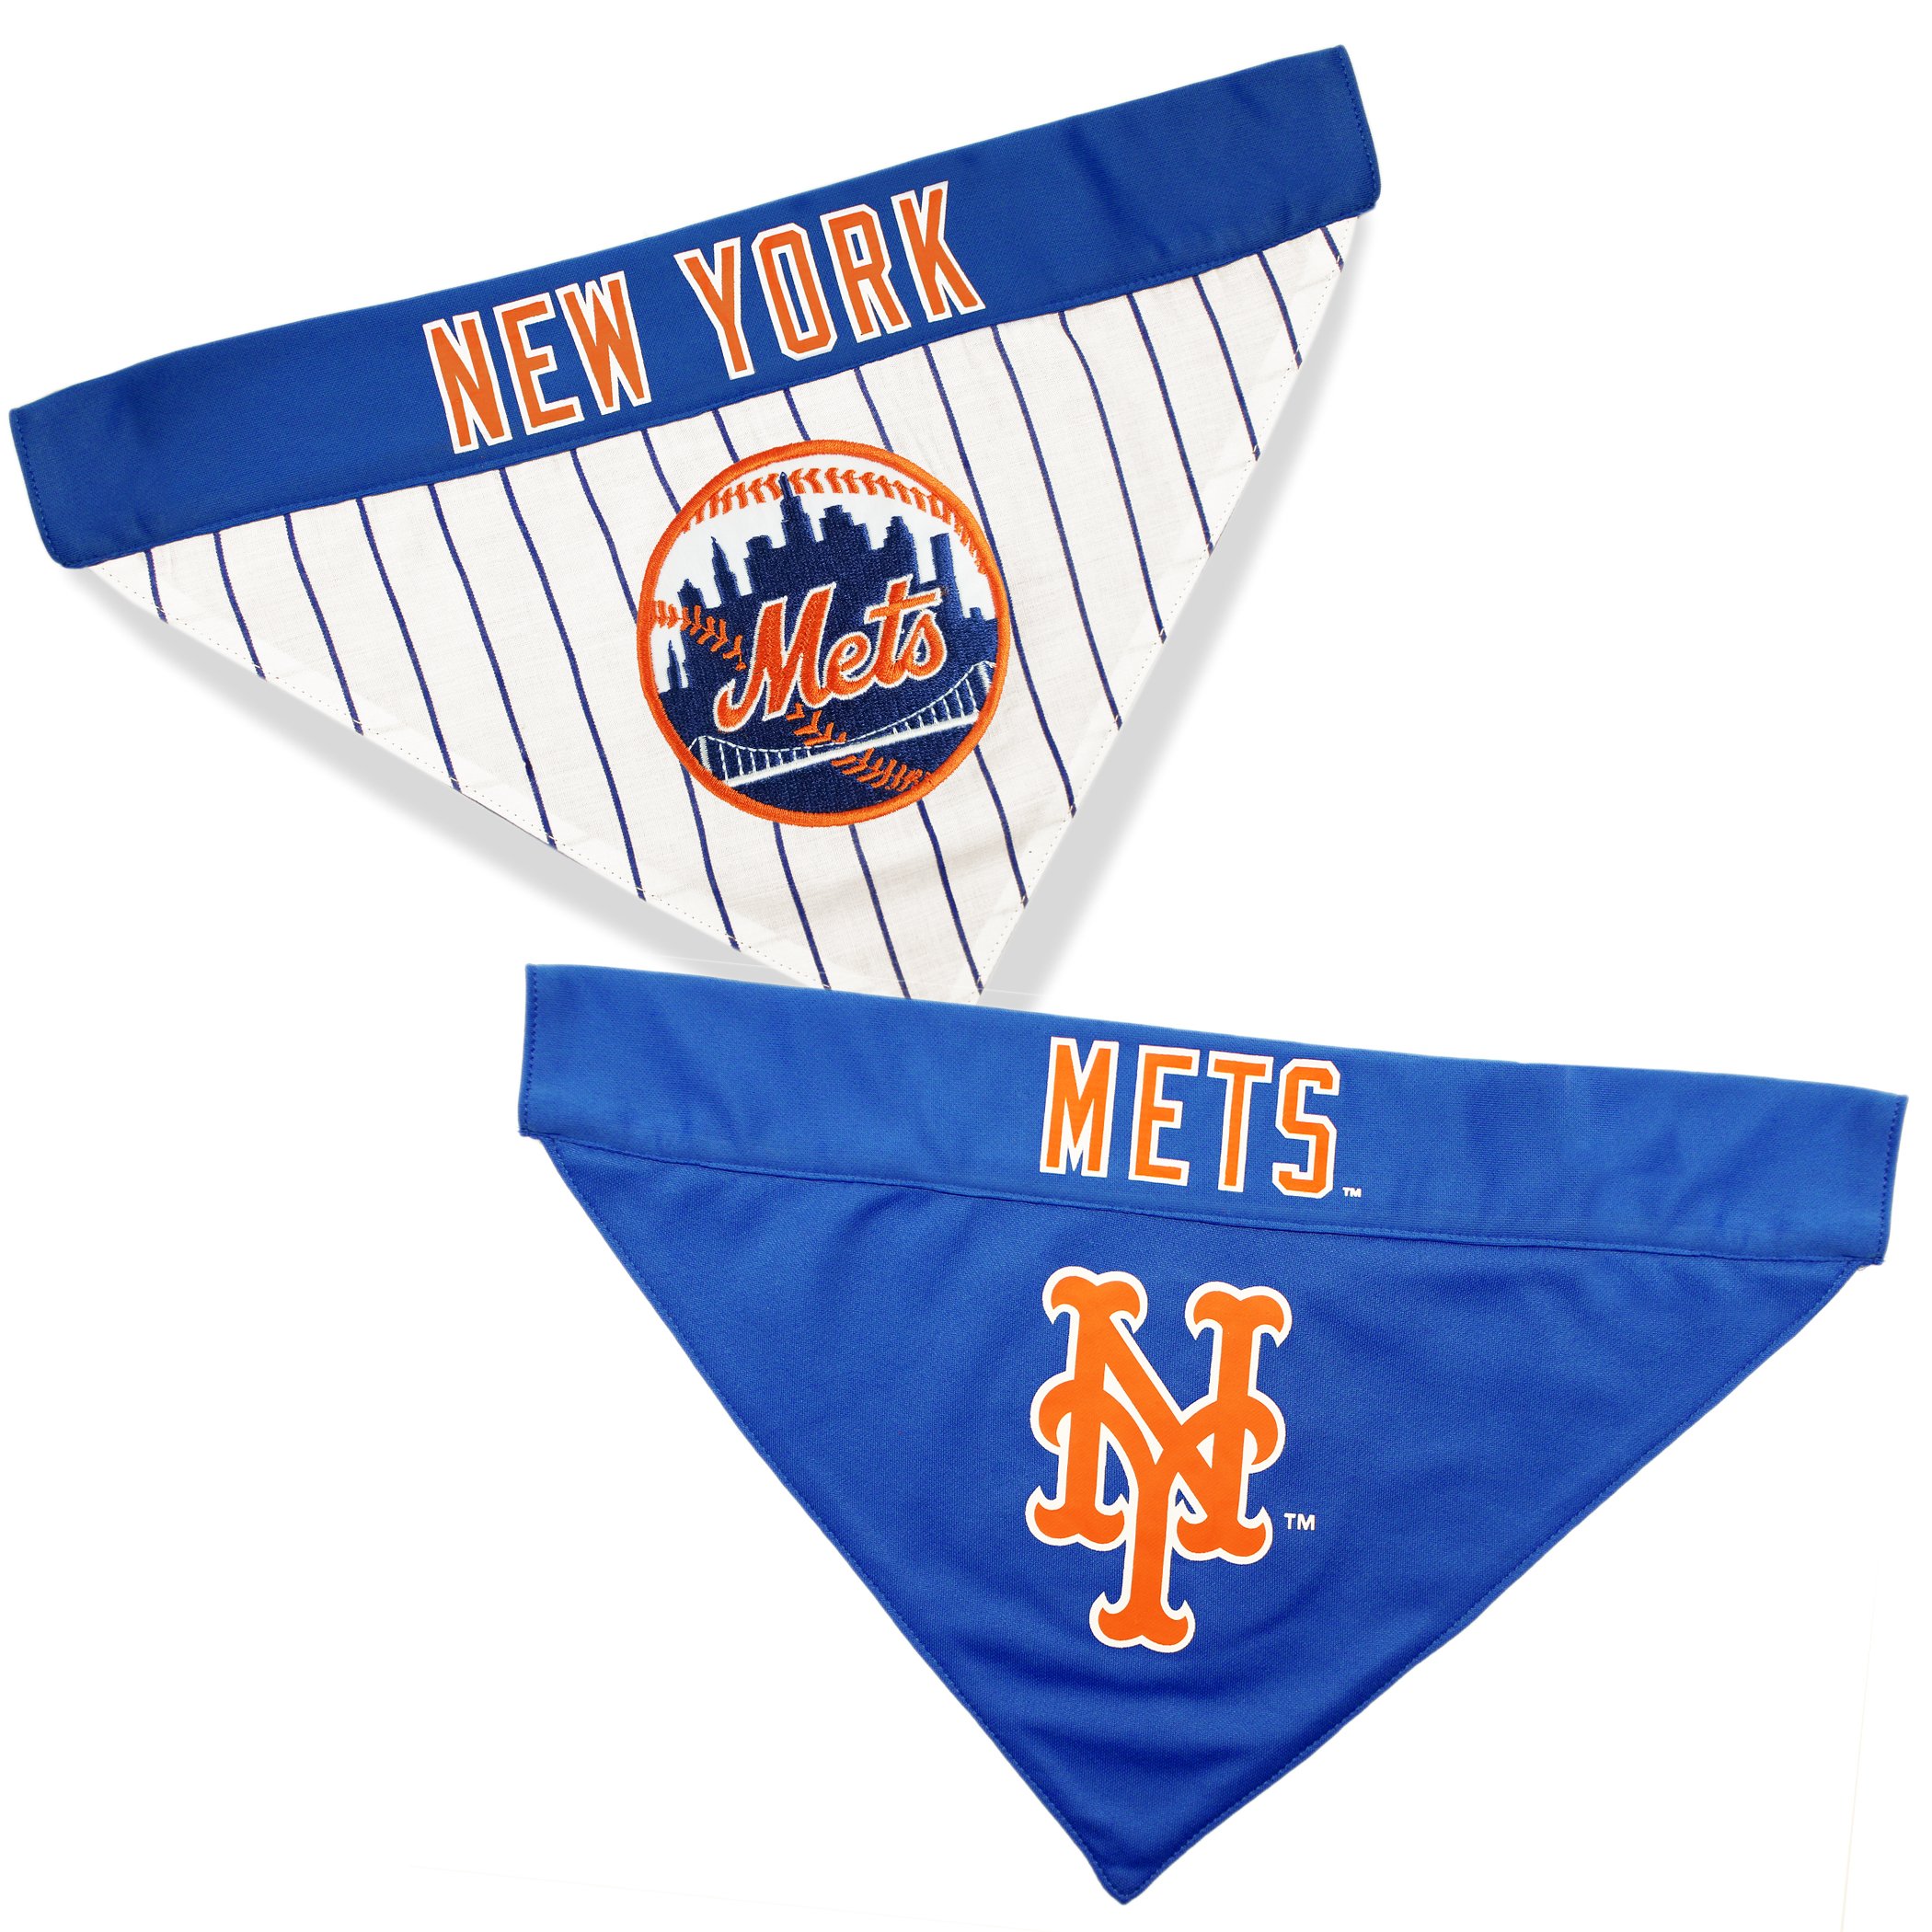 brandy beane recommends Mets Lingerie